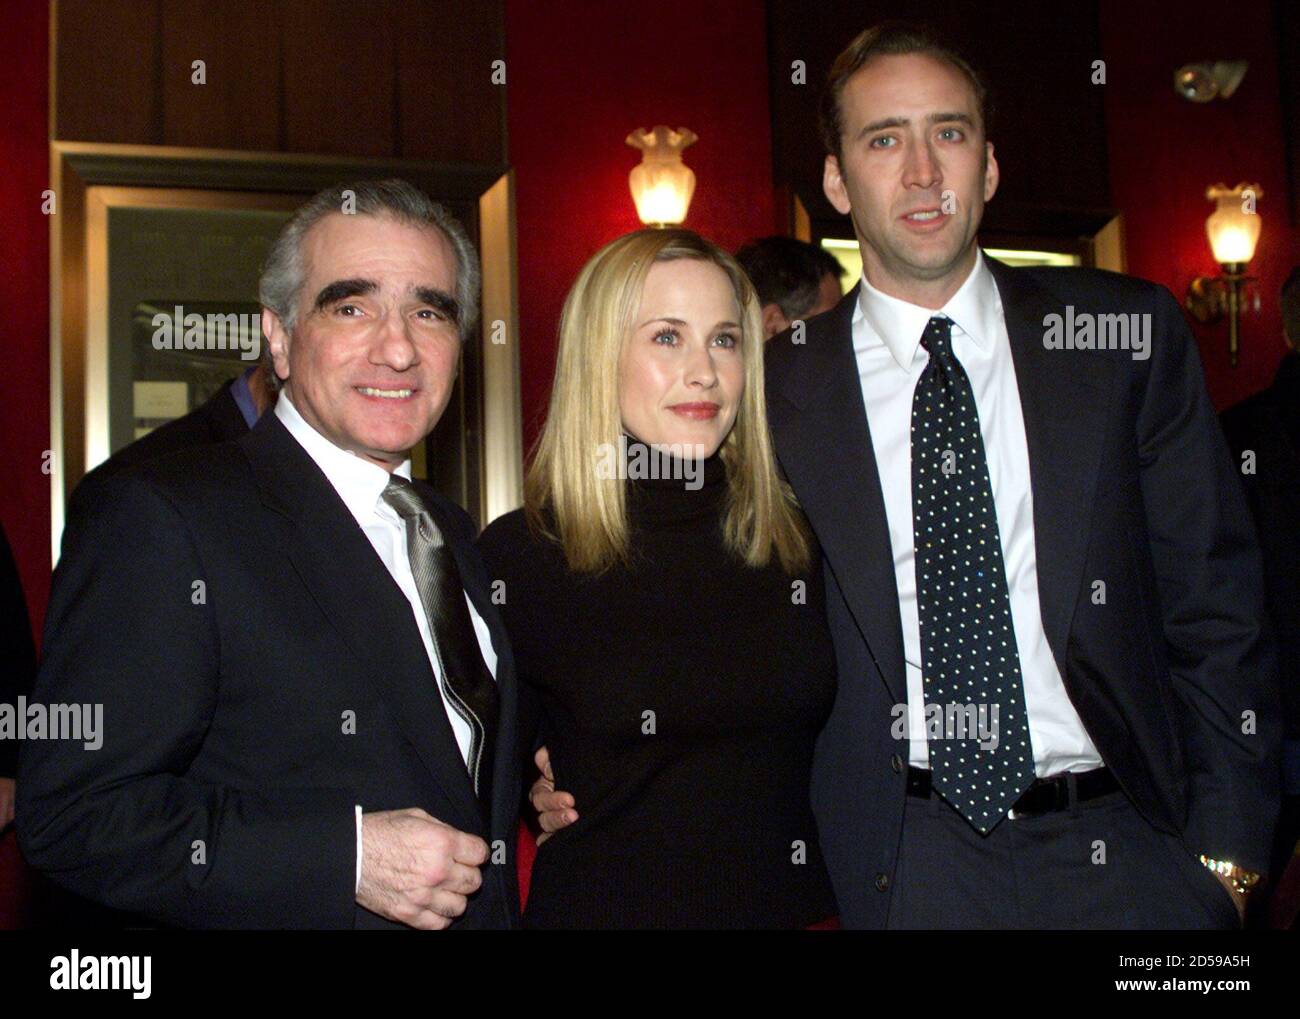 Actors Nicolas Cage (R) and Patricia Arquette pose with director Martin  Scorsese (L) at the world premiere of the new Paramount Pictures film  "Bringing out the Dead" at the Ziegfeld Theater in